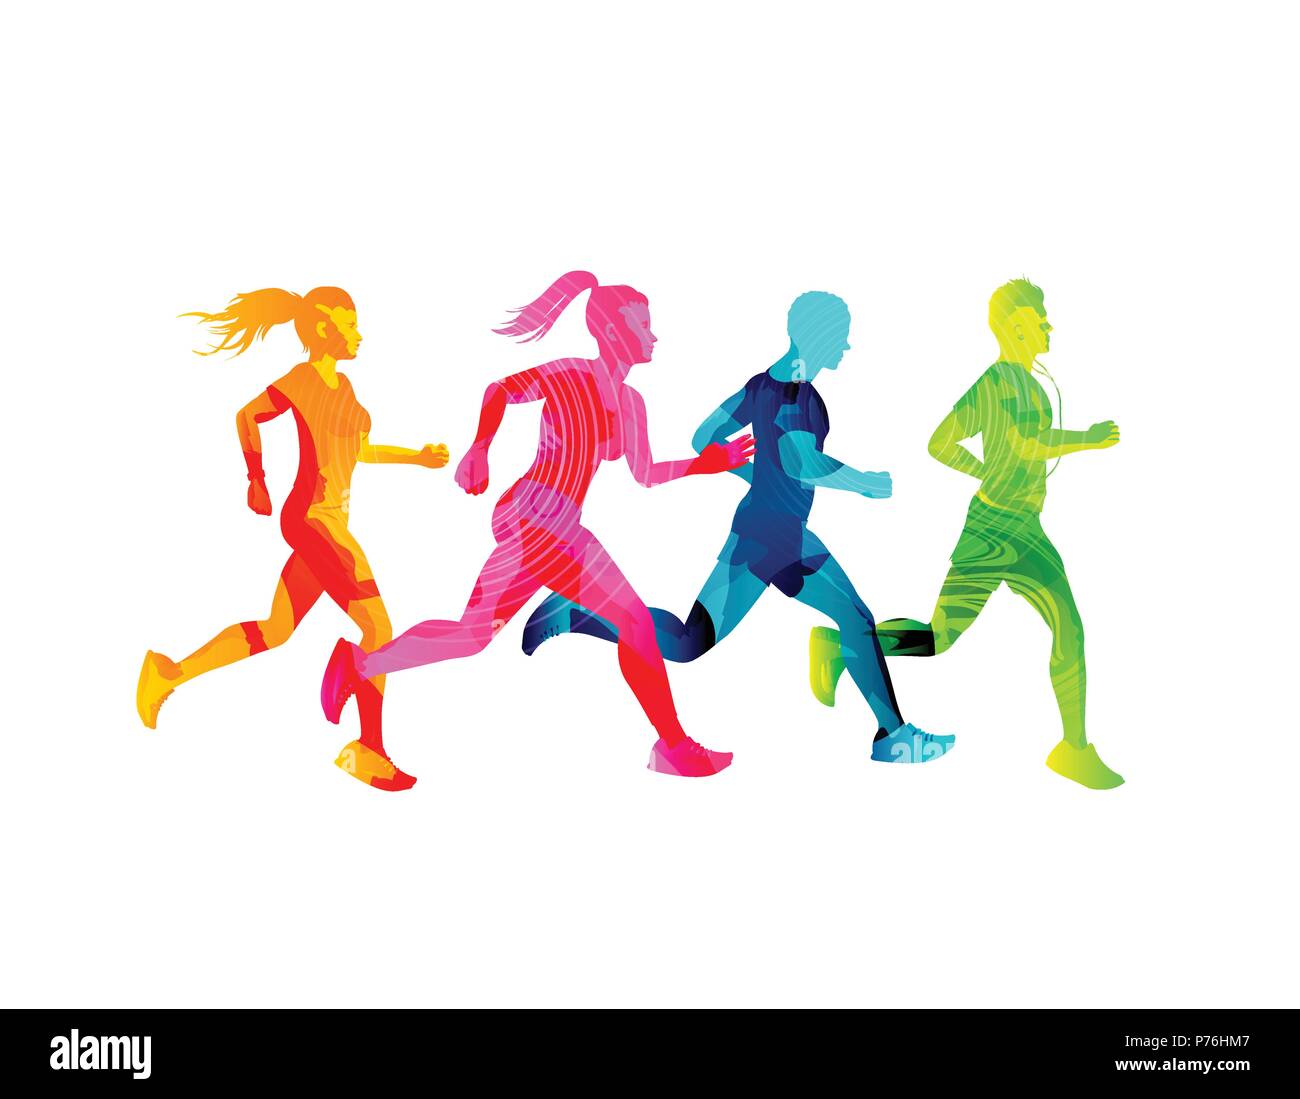 A group of running men and women staying fit. Colourful texture people silhouettes. Vector illustration. Stock Vector